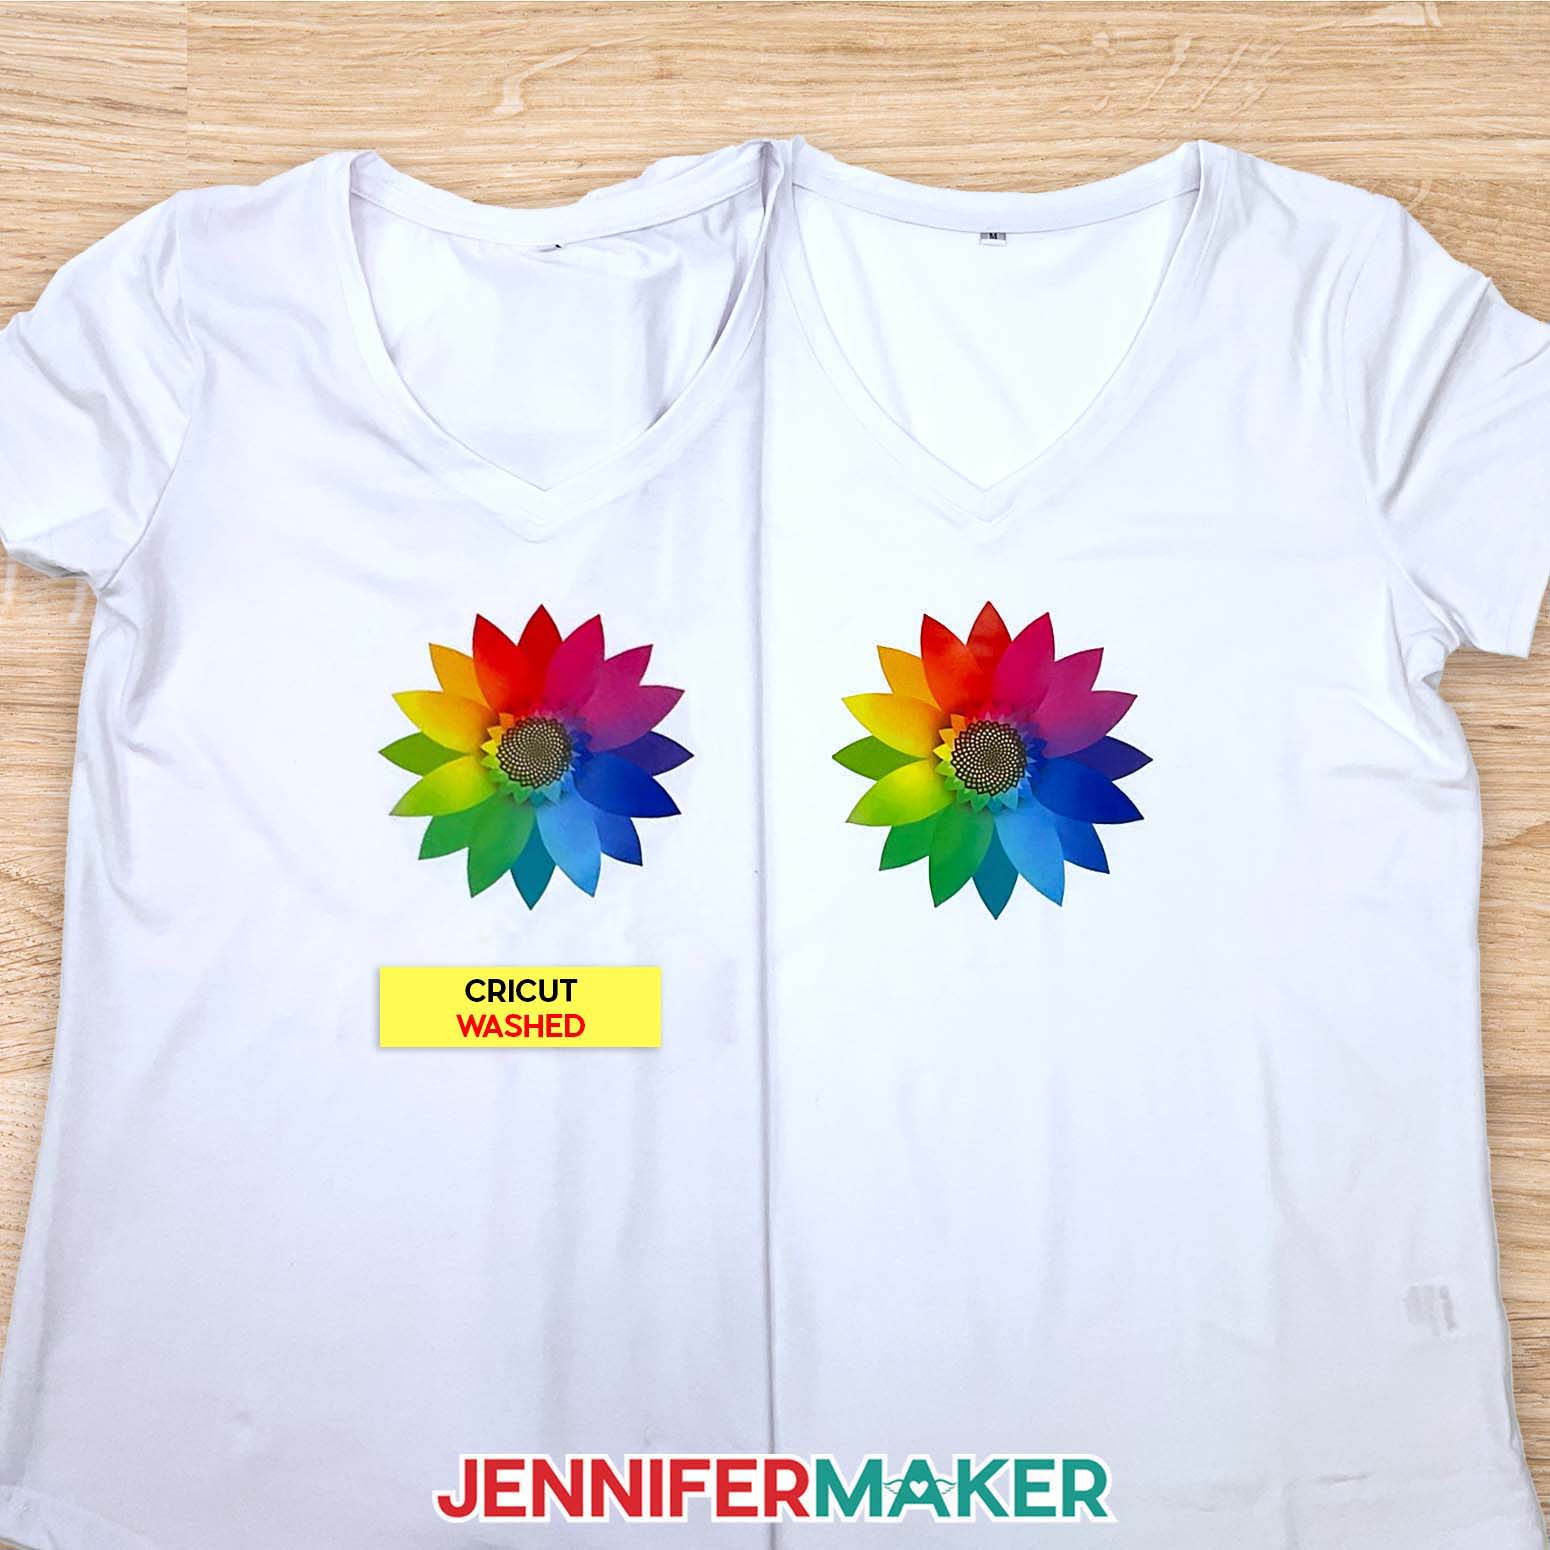 Here are the unwashed and washed Cricut shirts, to see how they compare